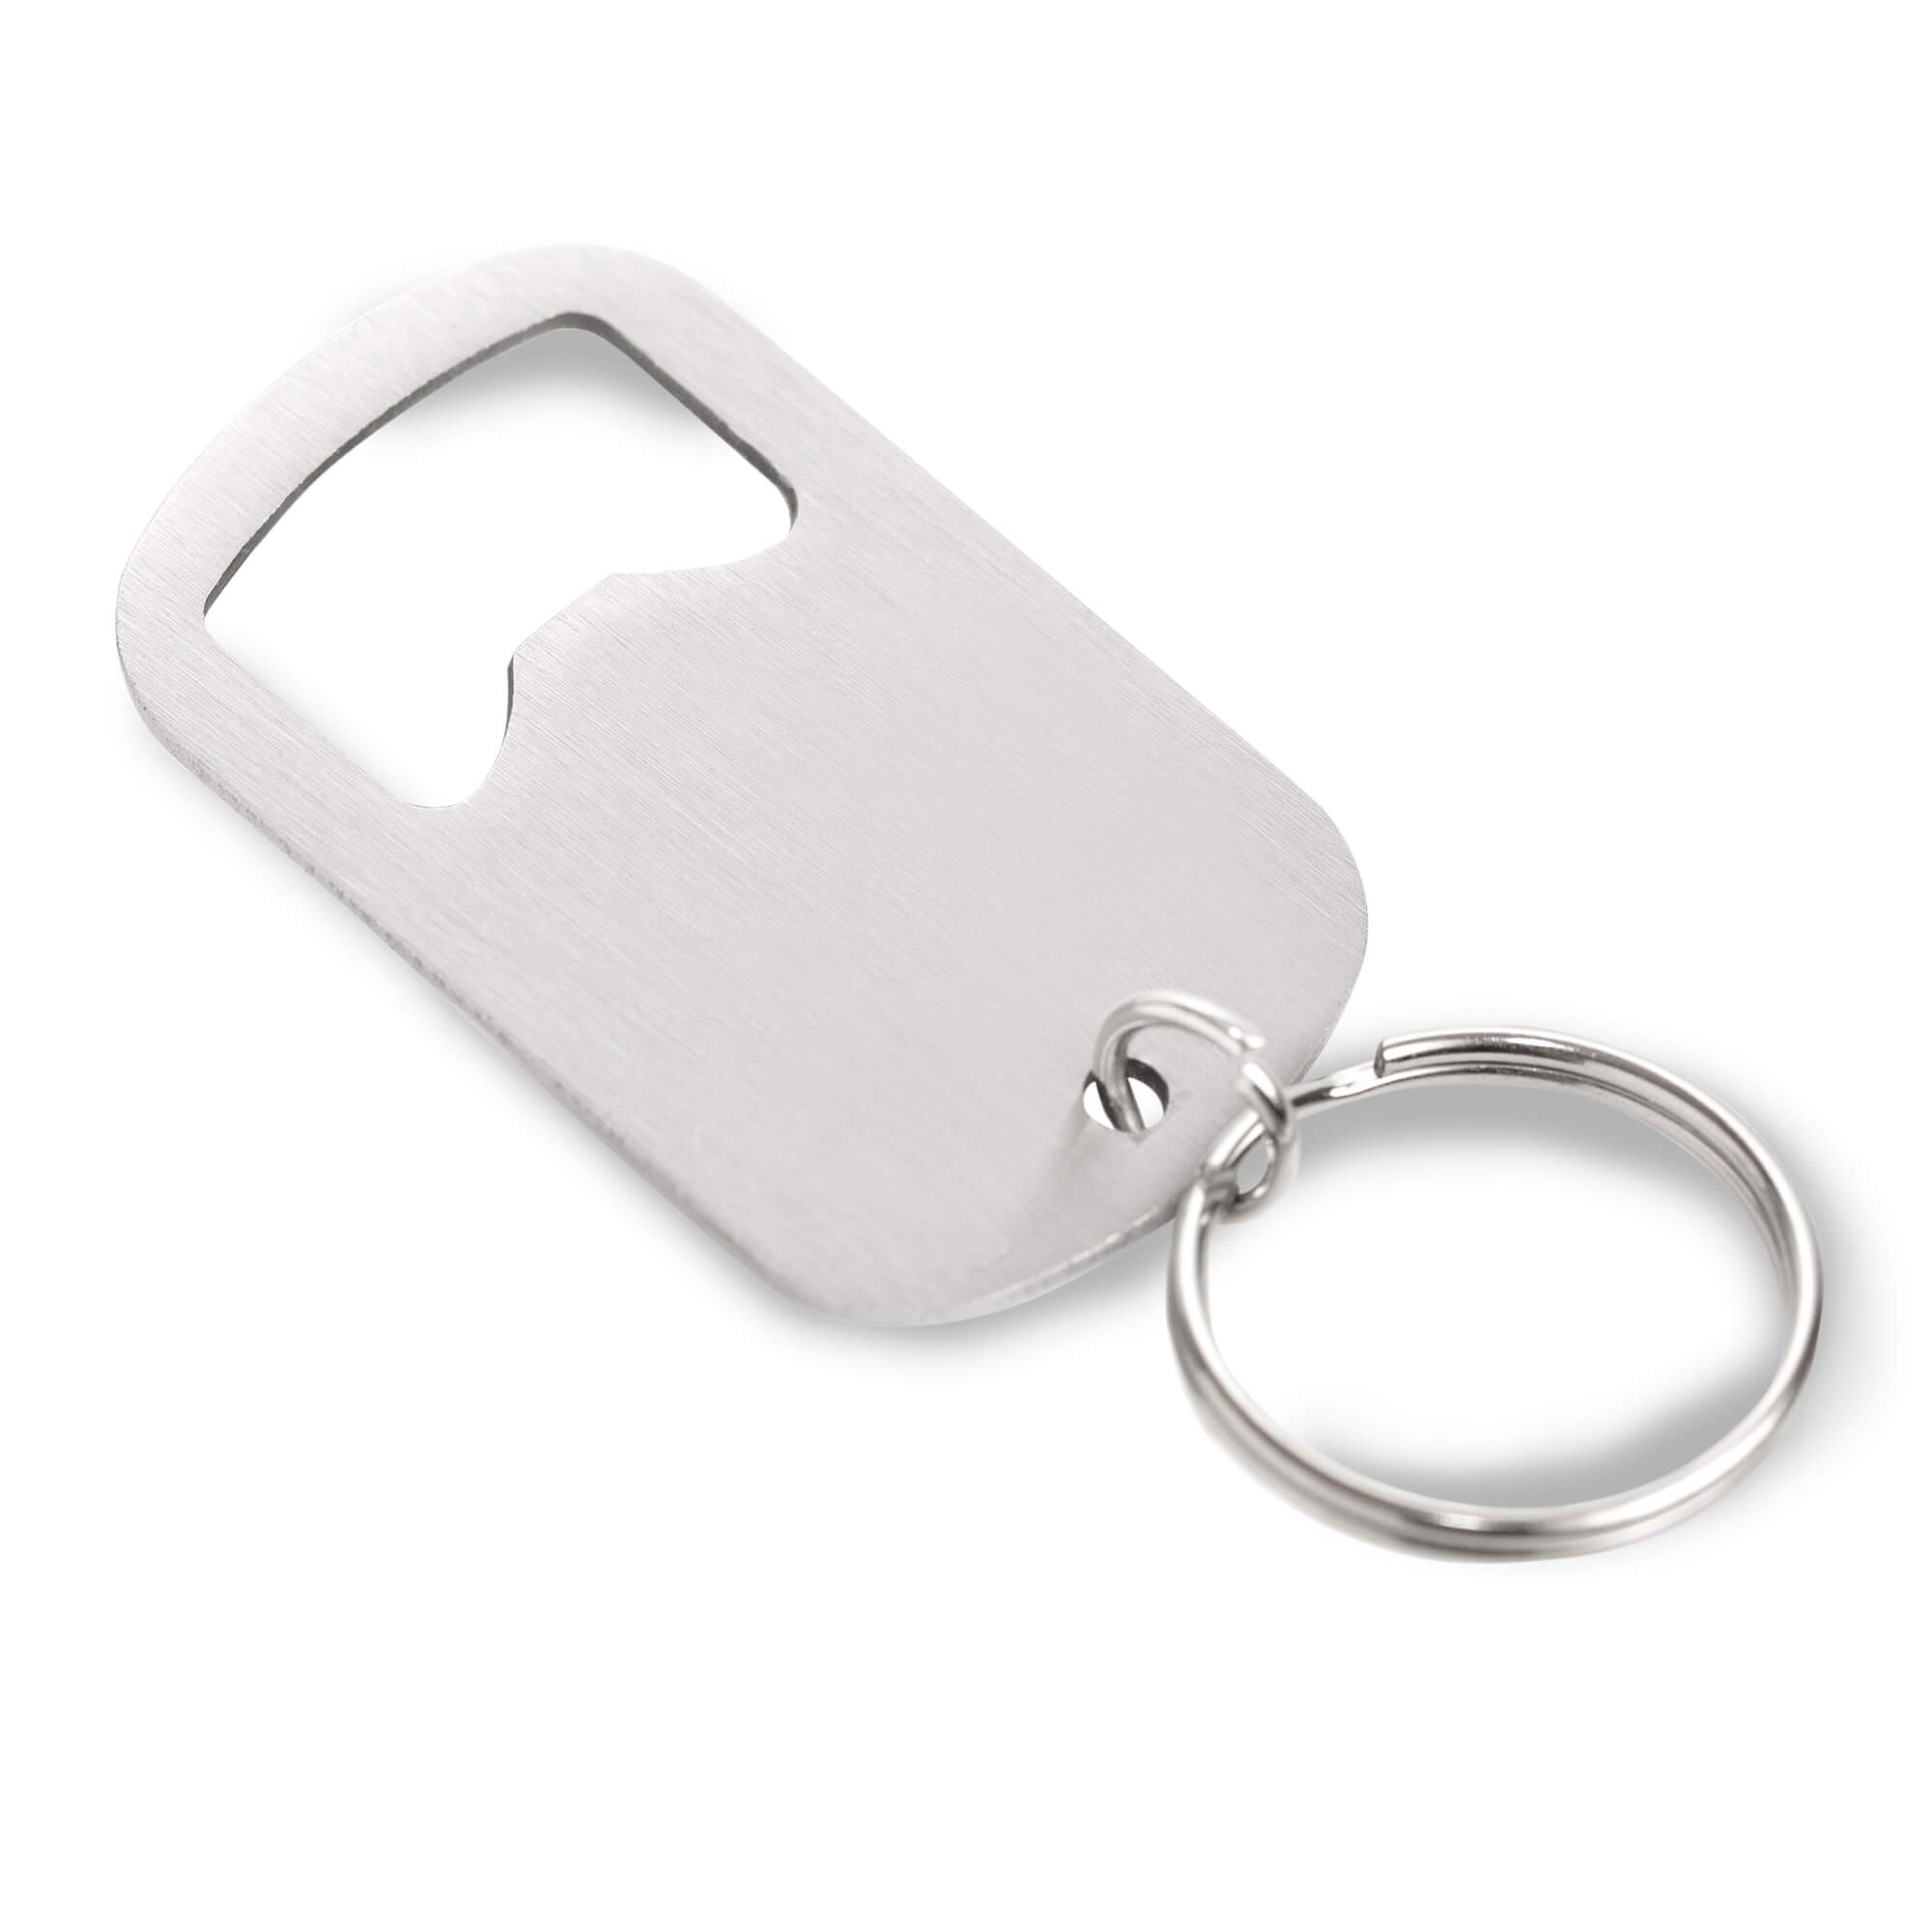 Key ring bottle opener stainless steel 50mm x 31mm with key ring ø25mm